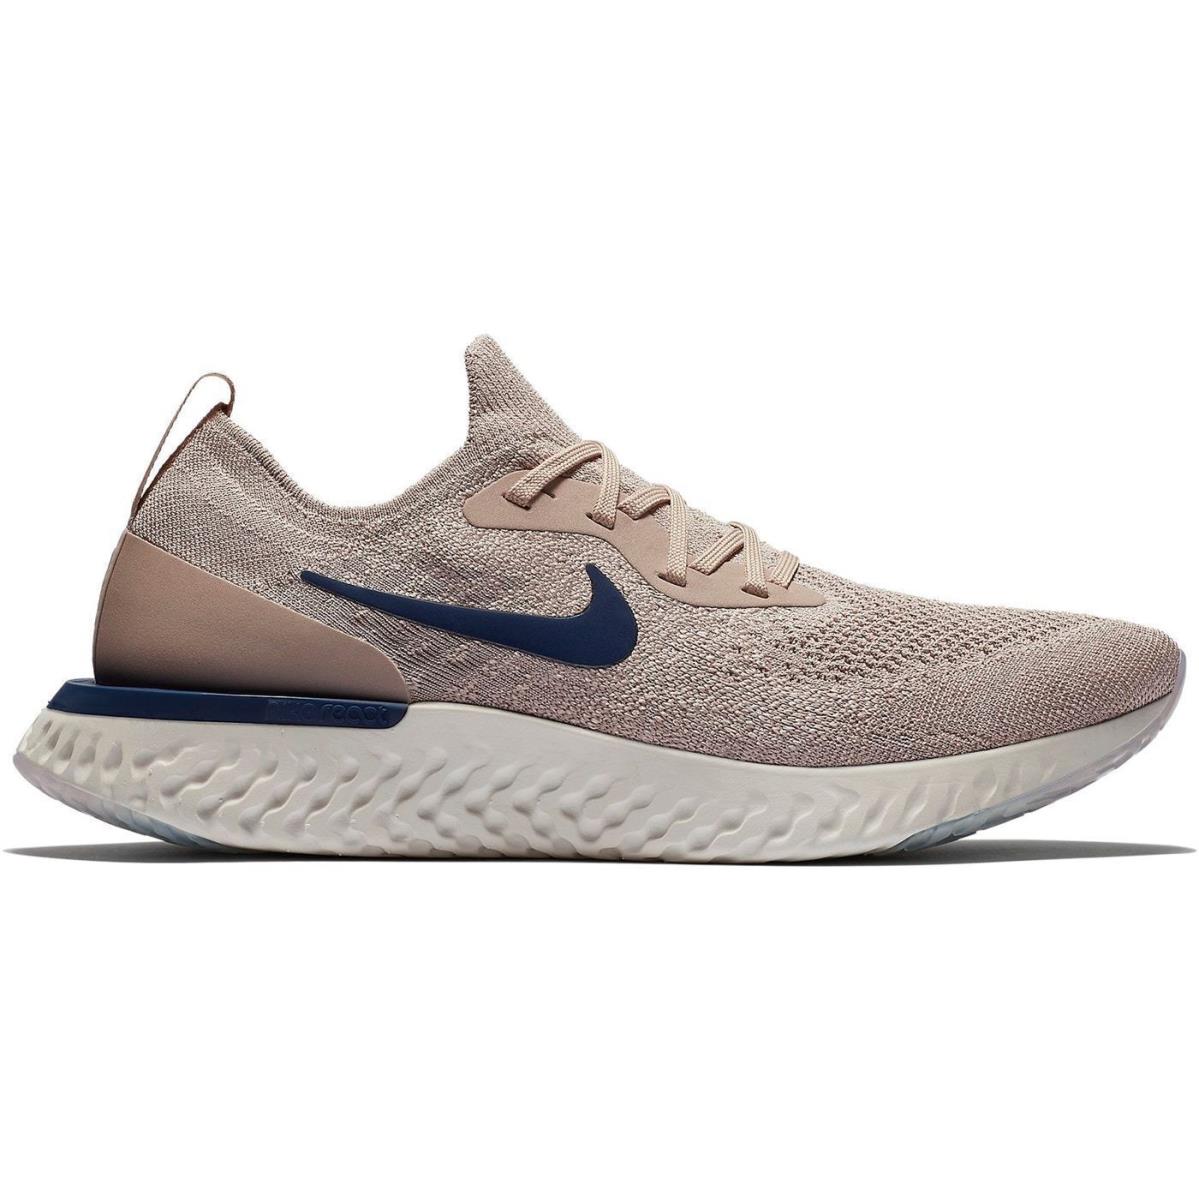 Nike shoes Epic React - Diffused Taupe/Blue Void 0